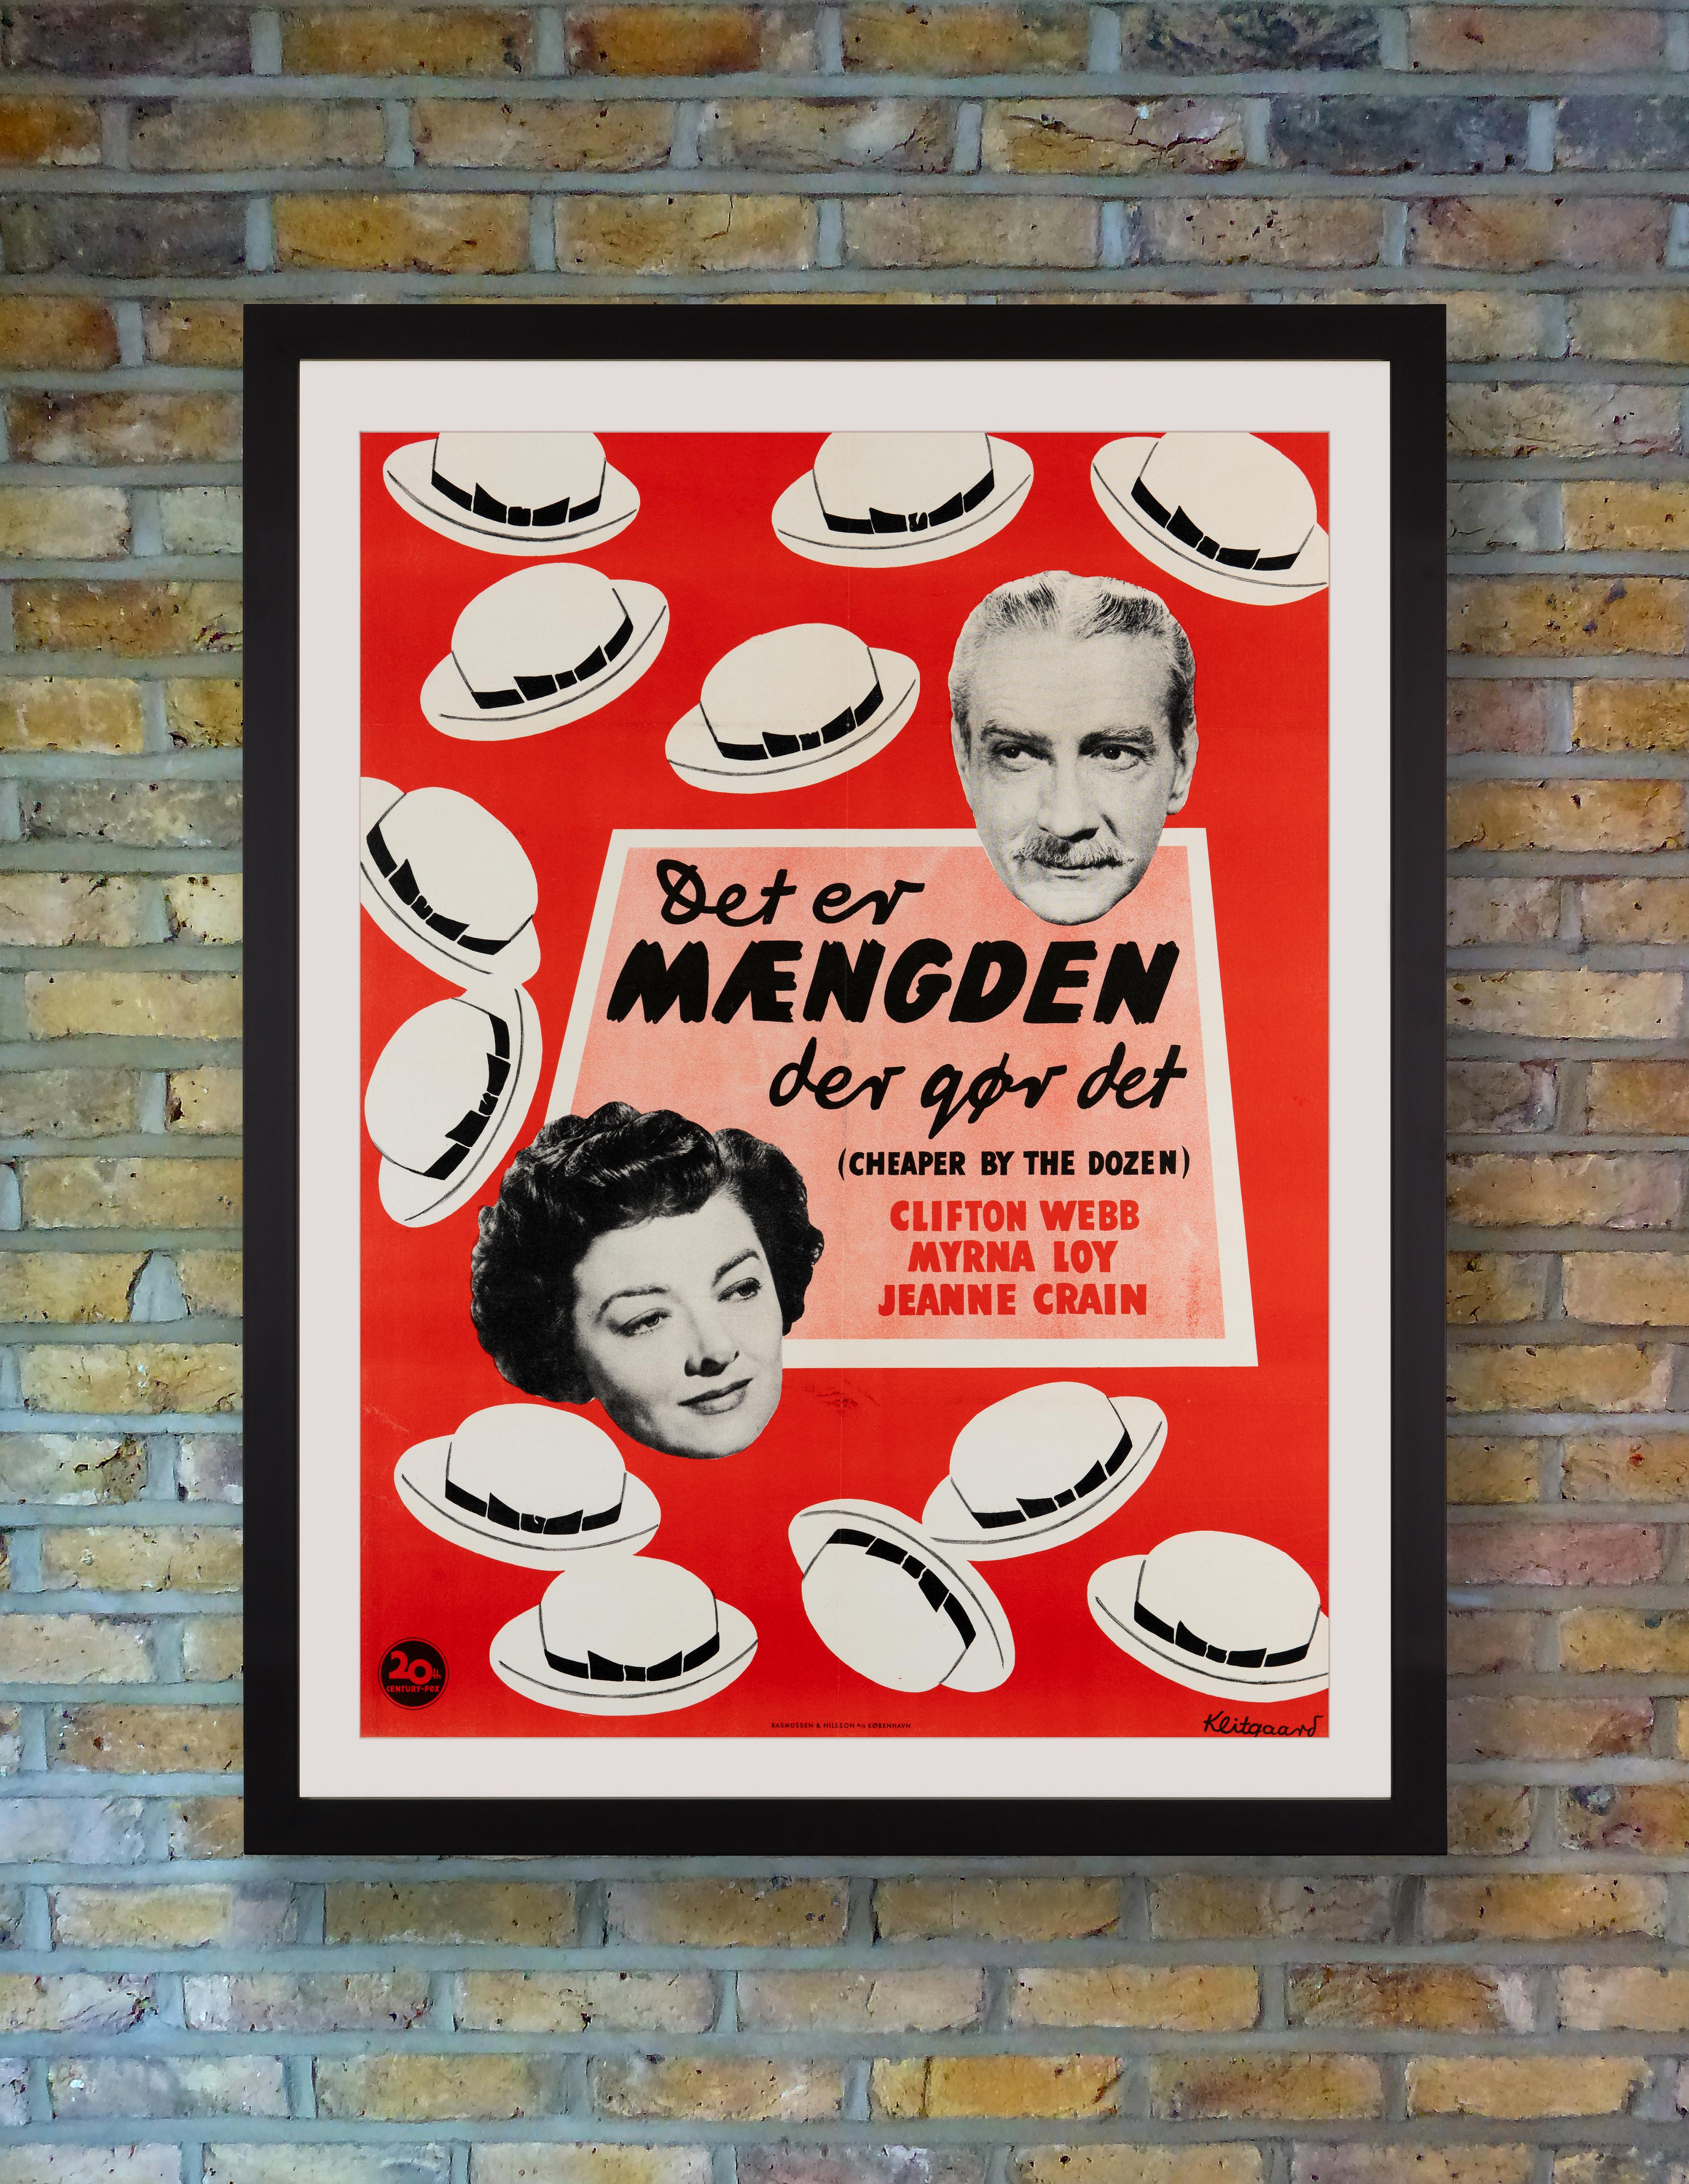 With it's twelve jolly little hats, this charming poster by Klitgaard advertised the first Danish release of the fun-filled 1950 family comedy 'Cheaper by the Dozen,' starring Clifton Webb and Myrna Loy. Based on the autobiographical book of the